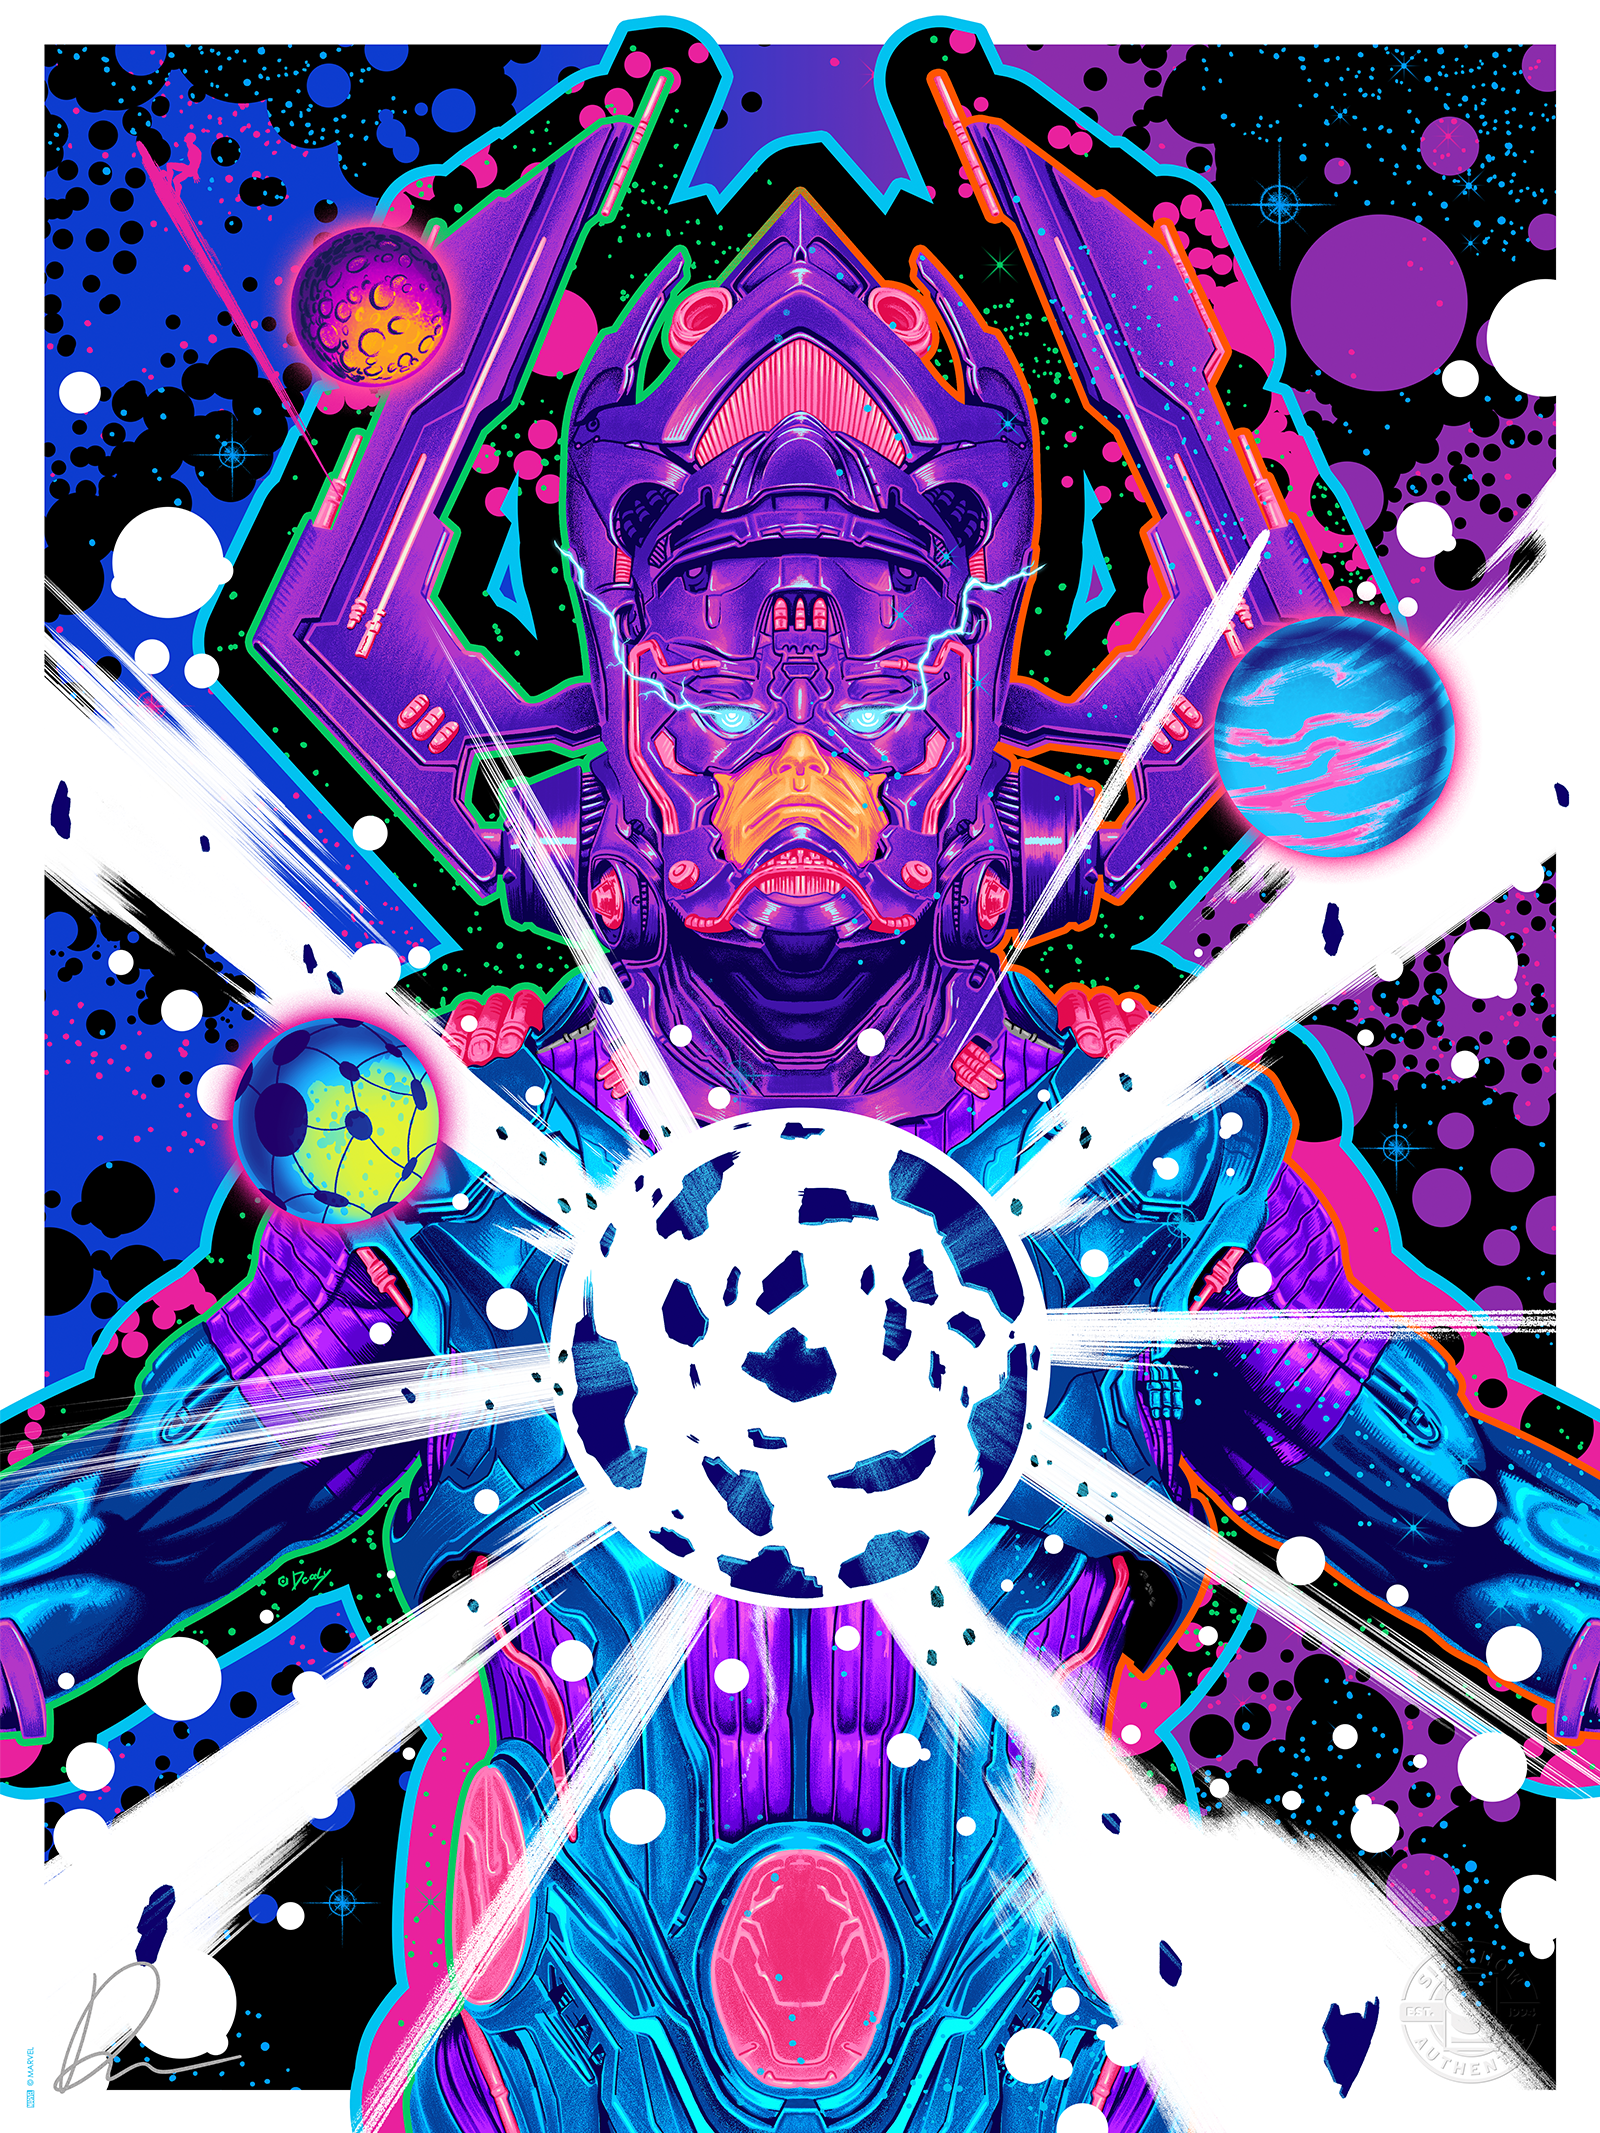 Galactus: The Devourer Fine Art Print by Doaly